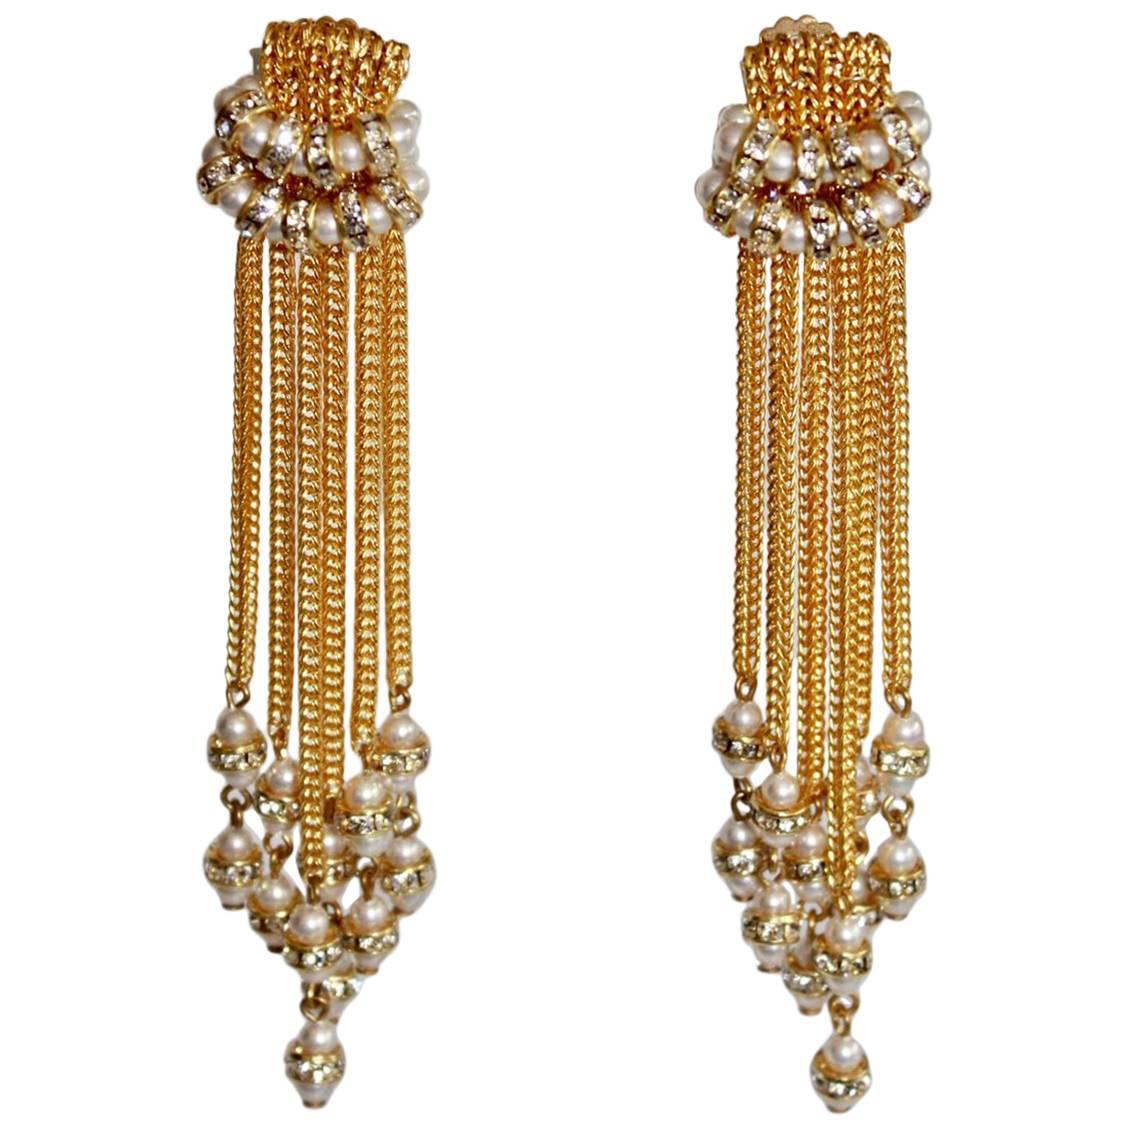 Francoise Montague Gold Tassel Clip Earrings with Glass Pearls and Crystals